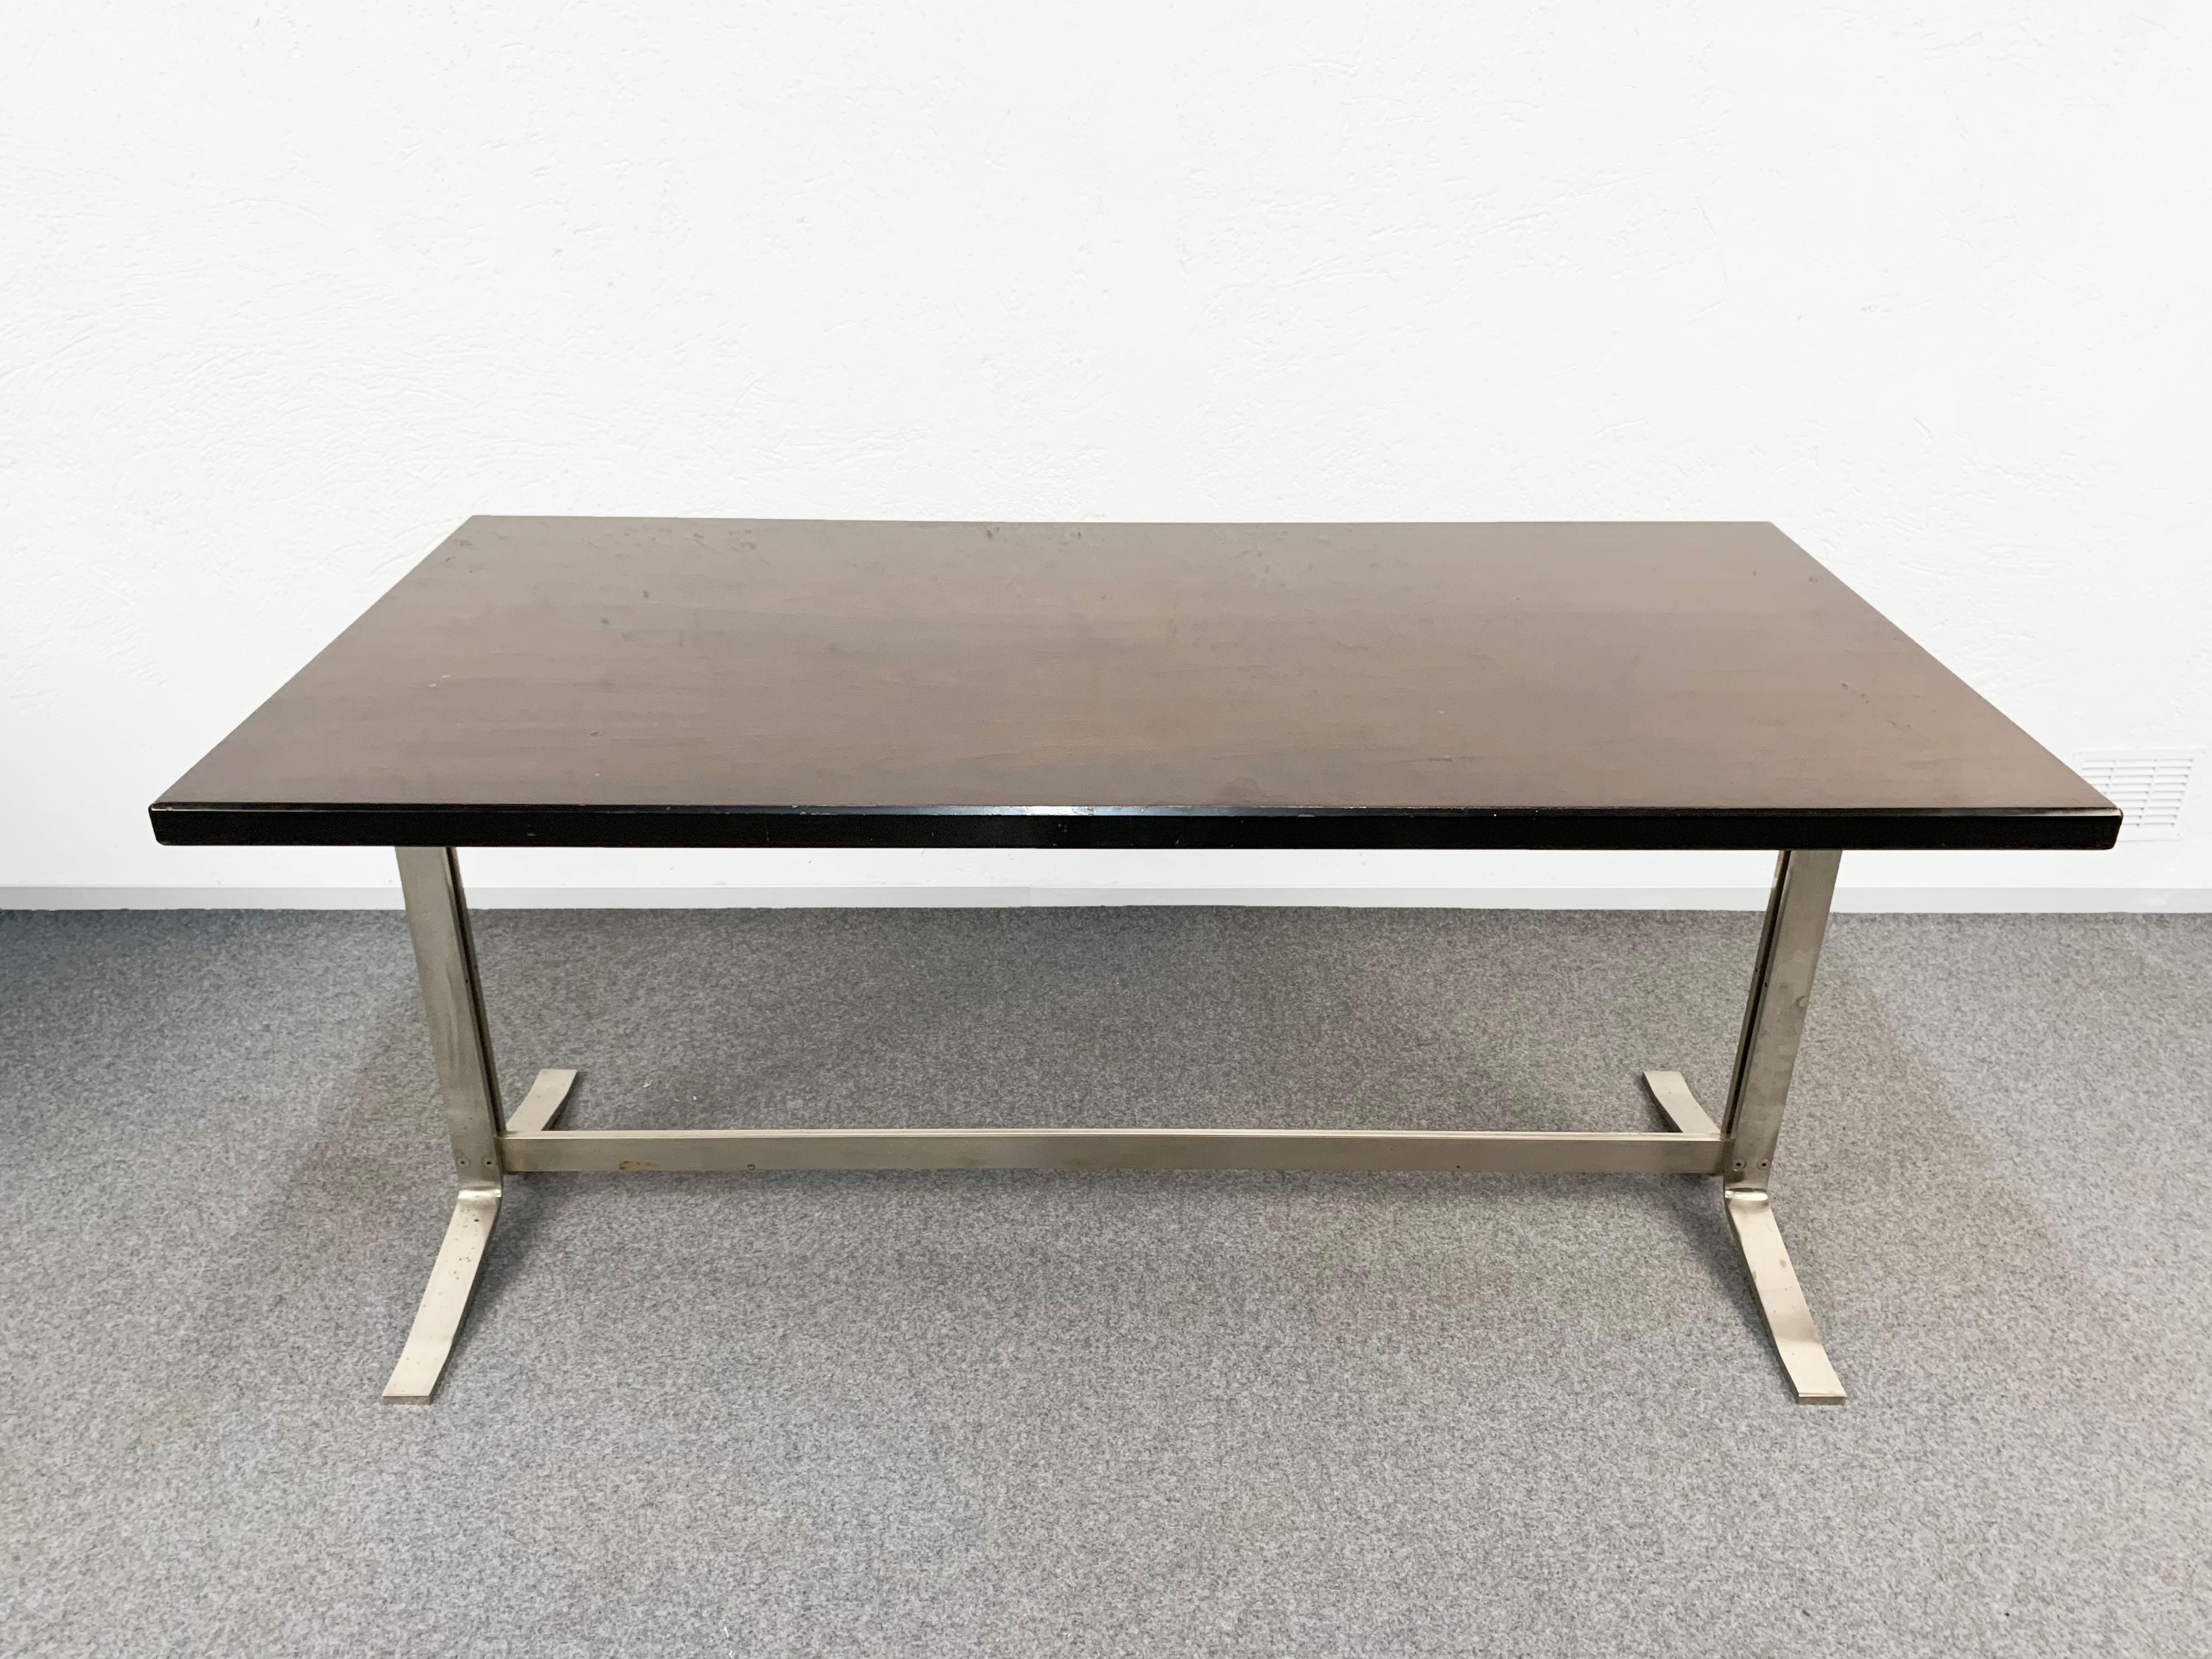 Amazing dining or writing table with wood top and steel base. This wonderful piece was designed by Gianni Moscatelli and produced in Italy by Formanova in 1965. 

This astonishing item has a quite elegant, wide and minimal veneered wood top,